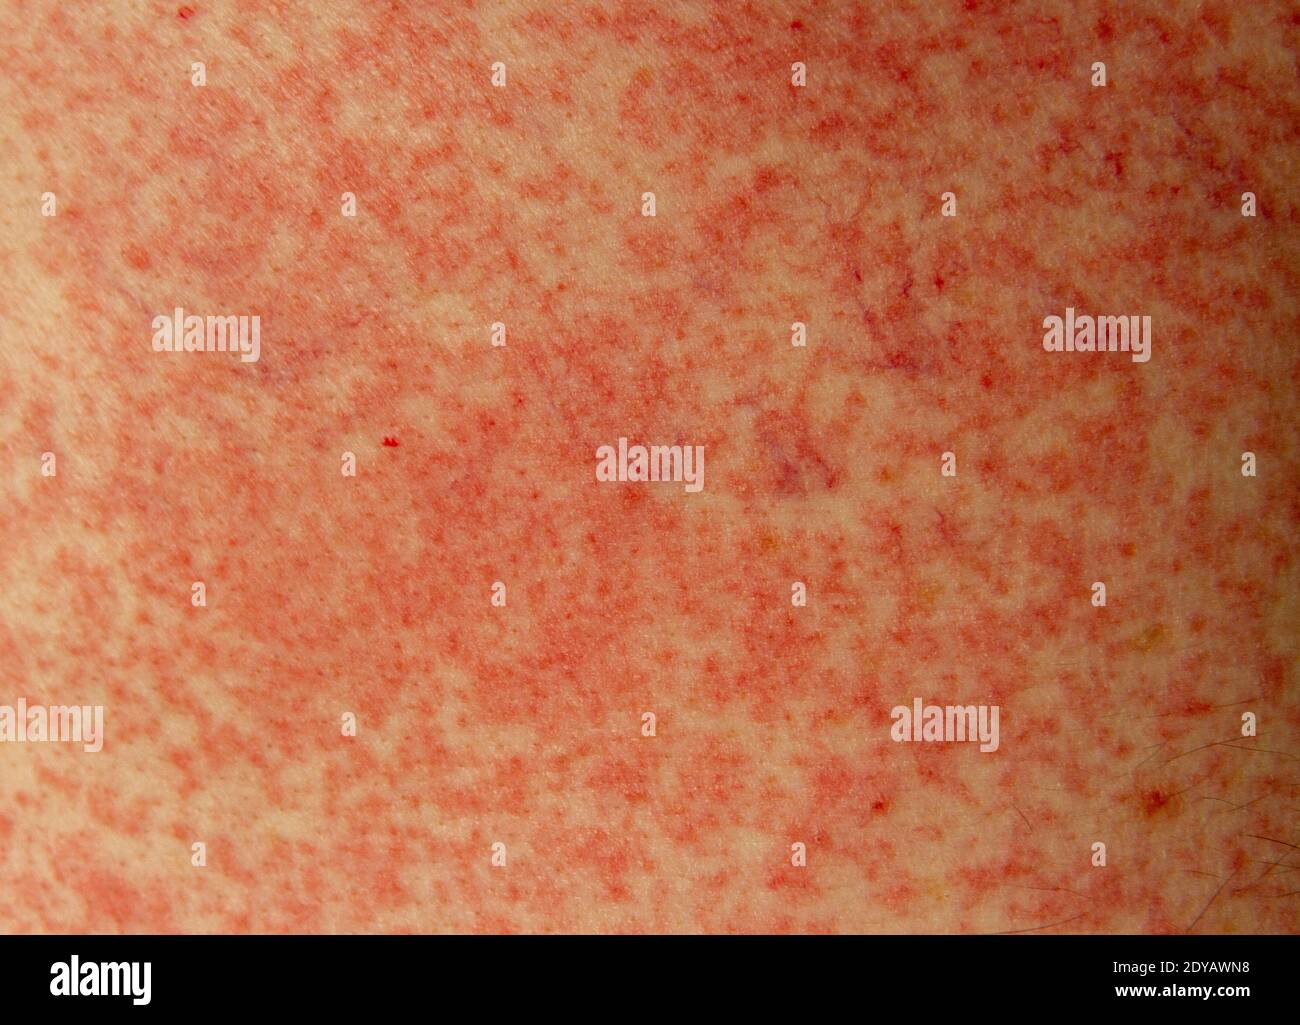 An allergic reaction (side effect) to penicillin (amoxicillin) on the skin of a 51 year old white man in London, UK. Stock Photo